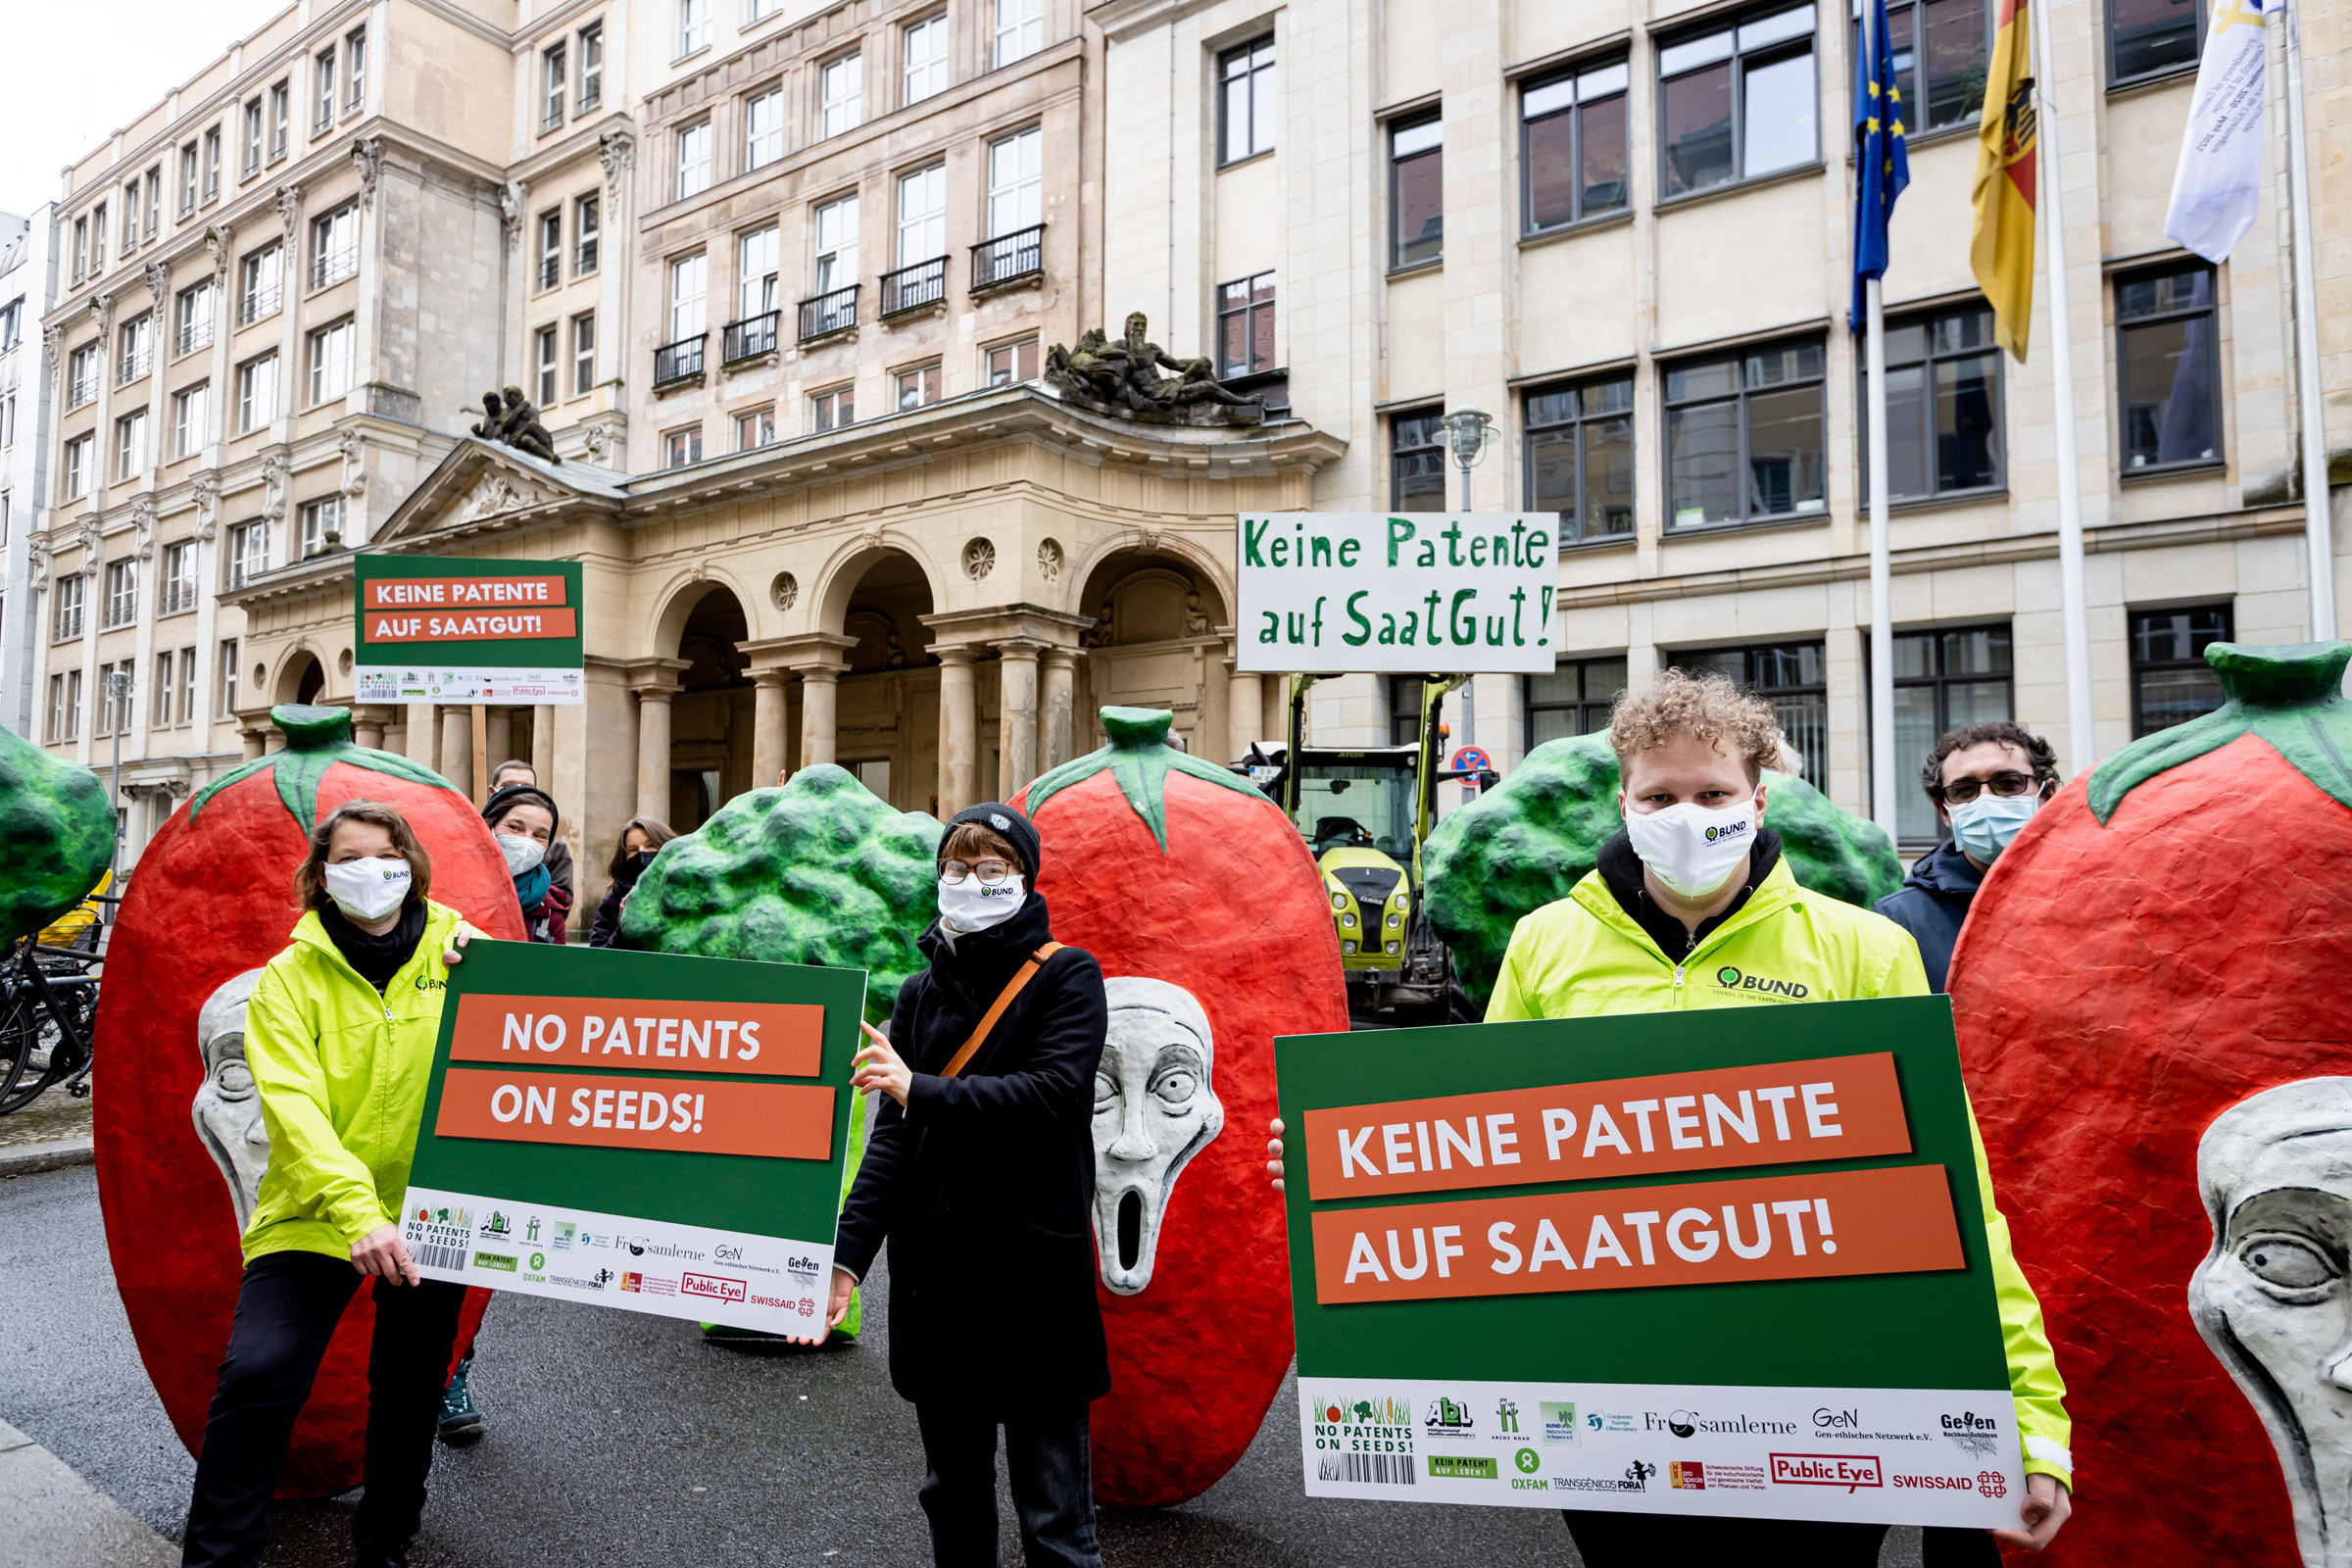 Our partners No patents on seeds recently protested in front of the German Ministry of Justice and will soon bring their screaming vegetables in protest in front of the EPO’s office in Munich right before their important meeting.